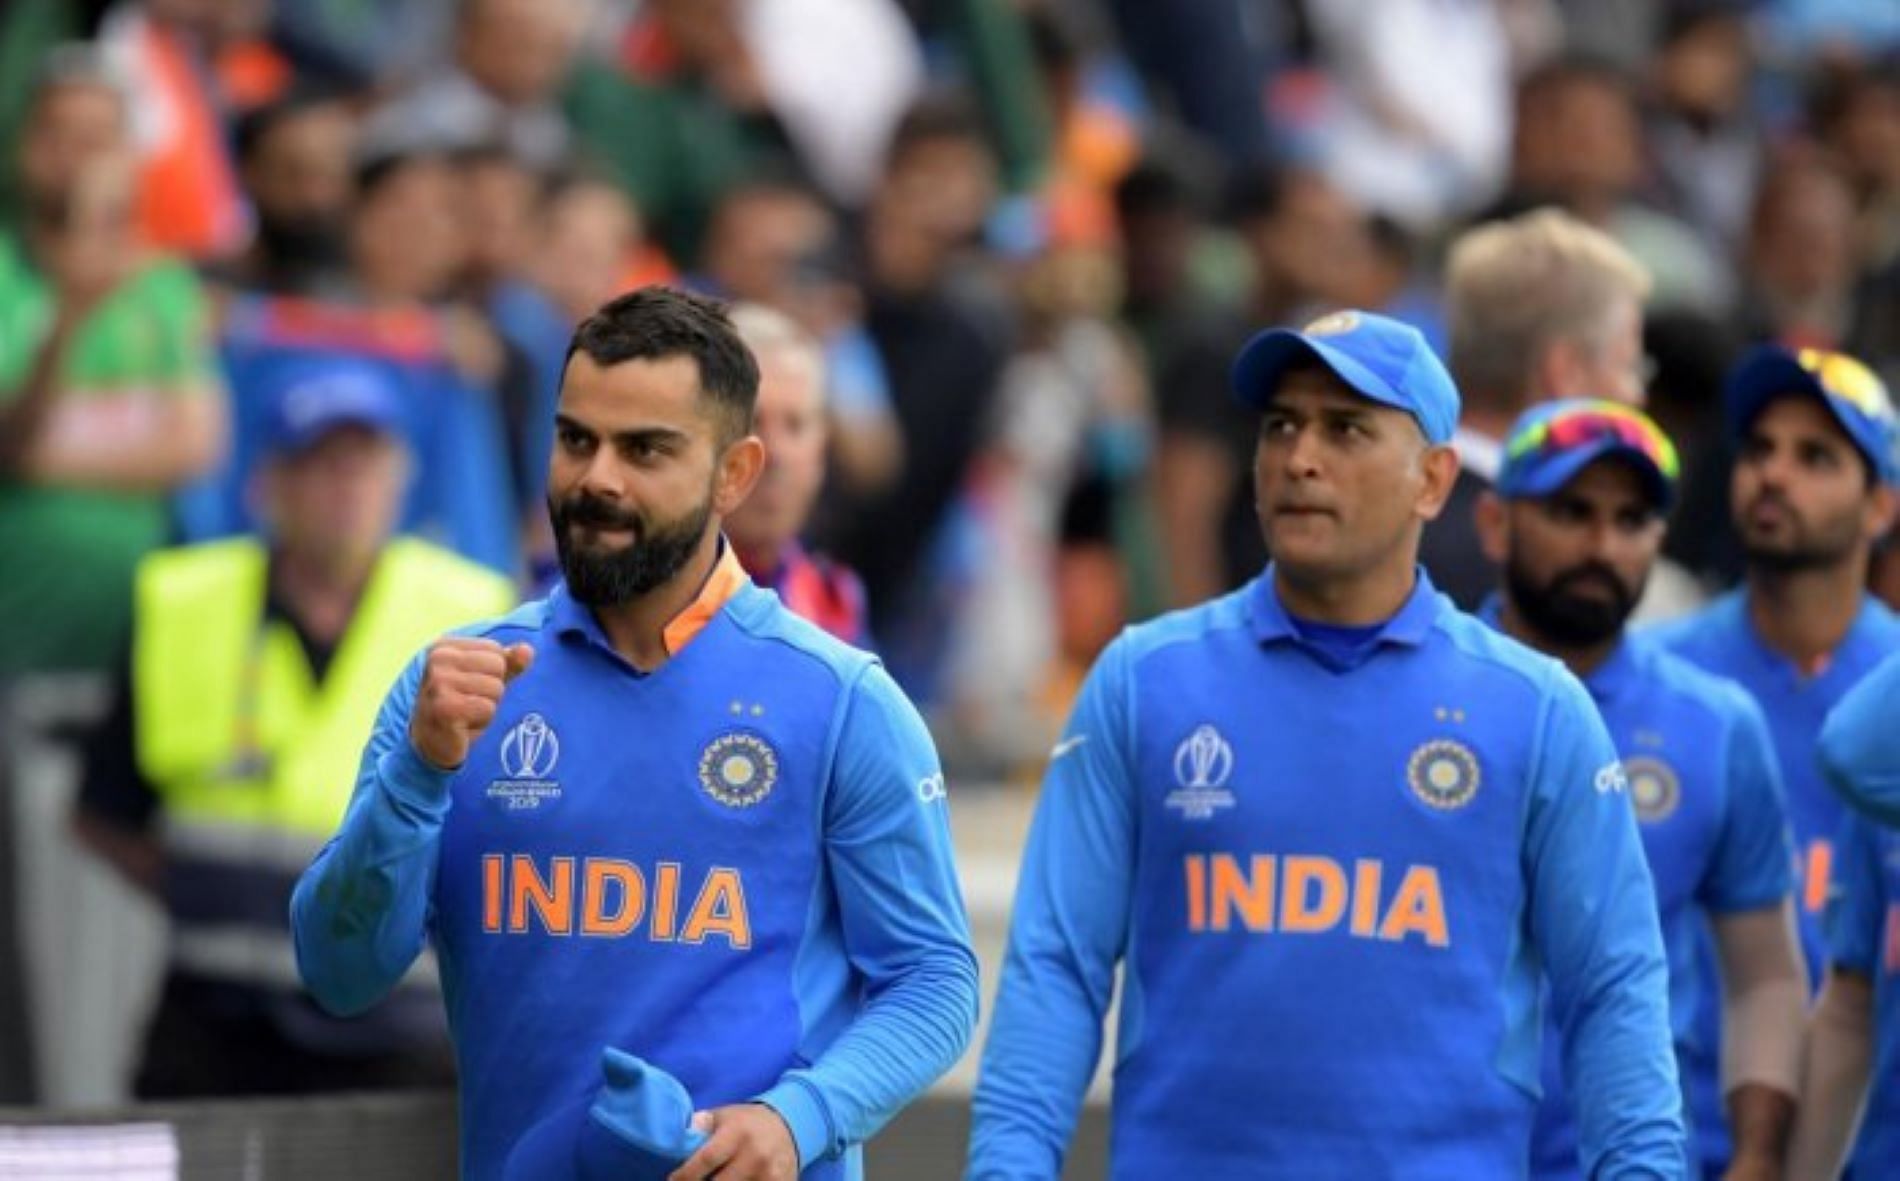 India suffered a gut-wrenching defeat to New Zealand in the semifinal of the World Cup.